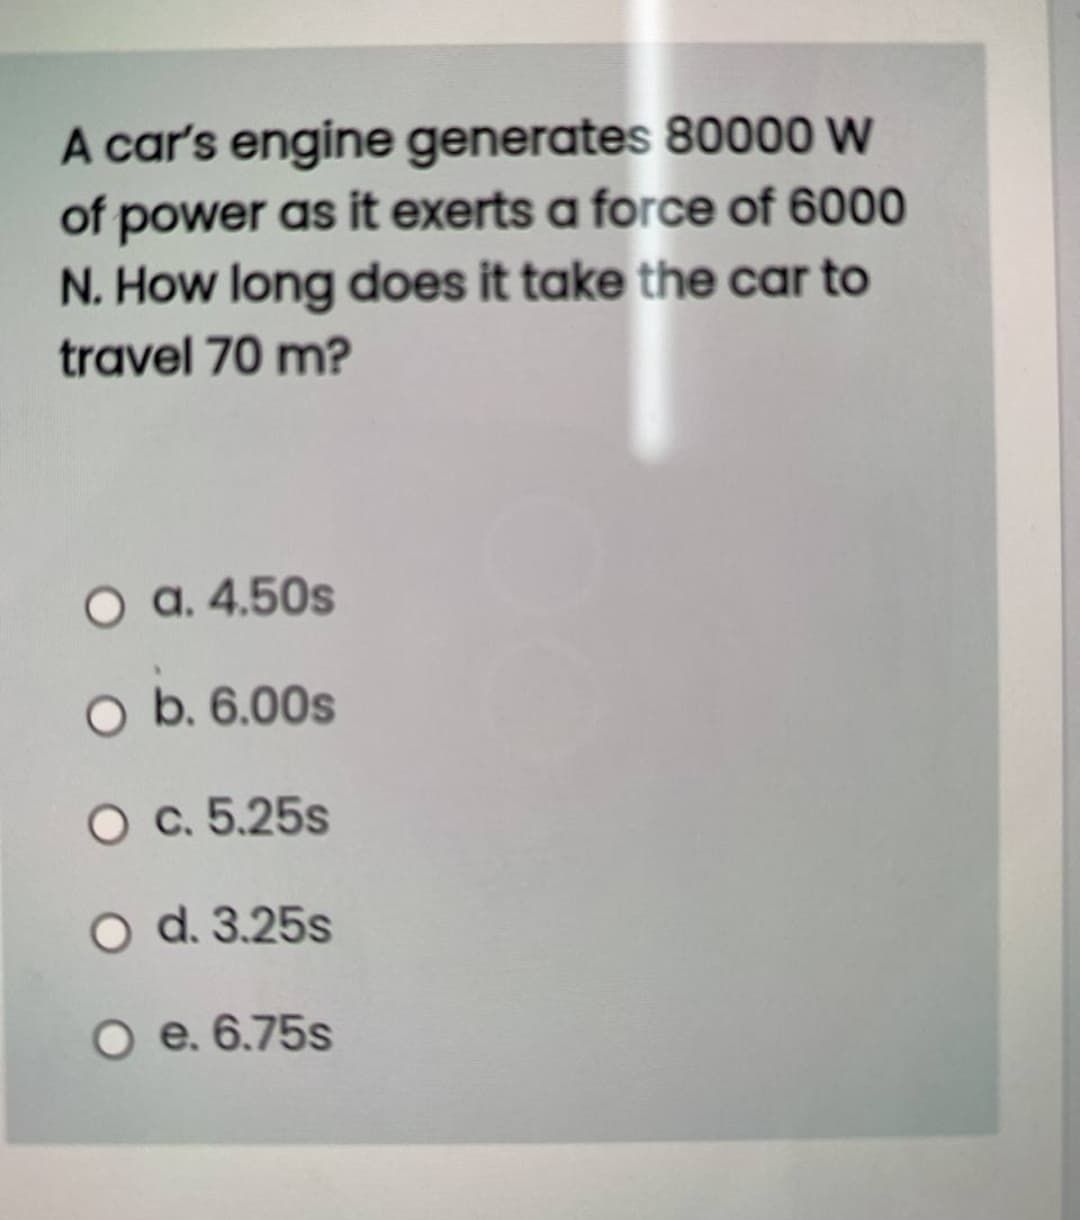 A car's engine generates 80000 W
of power as it exerts a force of 6000
N. How long does it take the car to
travel 70 m?
O a. 4.50s
O b. 6.00s
O c. 5.25s
O d. 3.25s
O e. 6.75s
